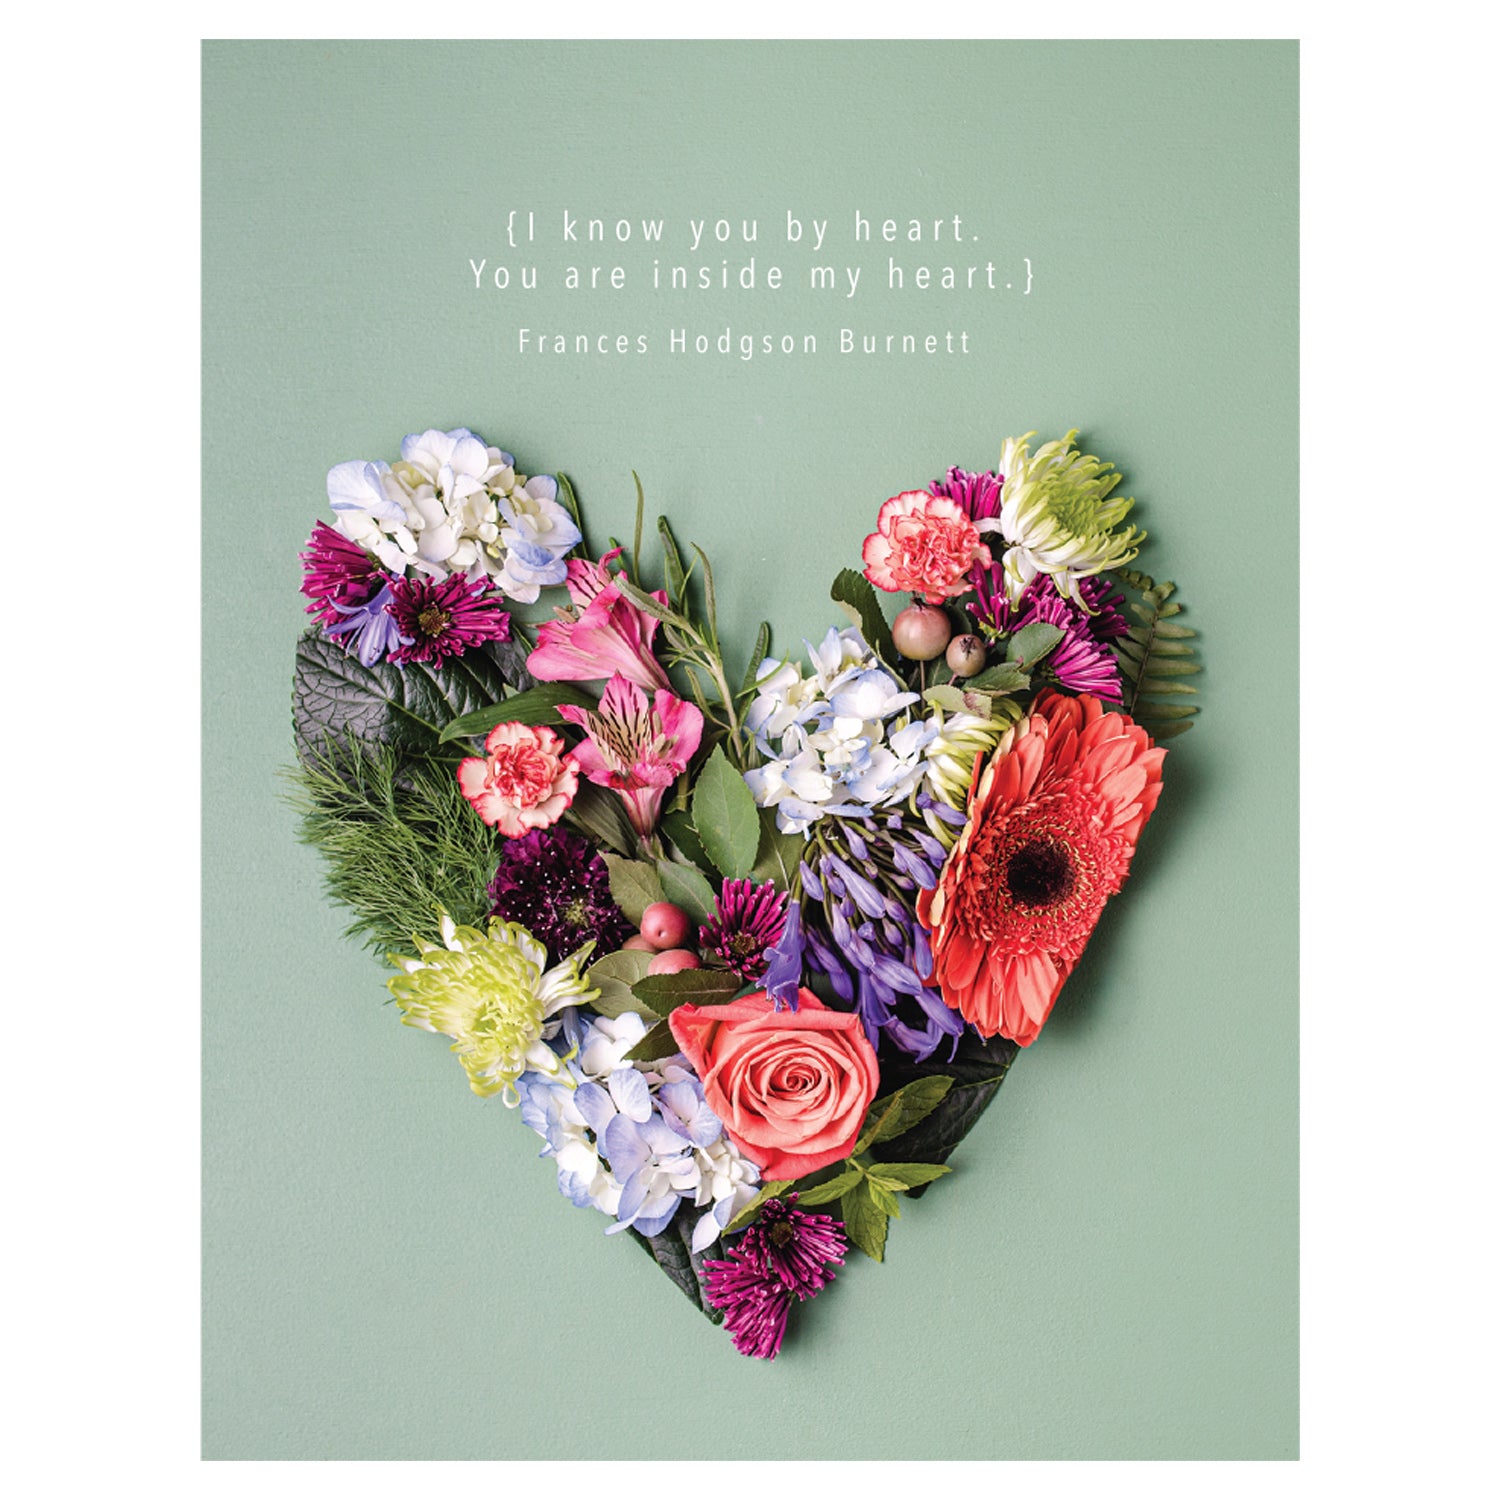 A Know You by Heart greeting card from Hester &amp; Cook featuring a heart-shaped arrangement of various colorful flowers, captured in original photography, on a green background with a romantic quote by Frances Hodgson Burnett at the top, printed on high quality uncoated stock.